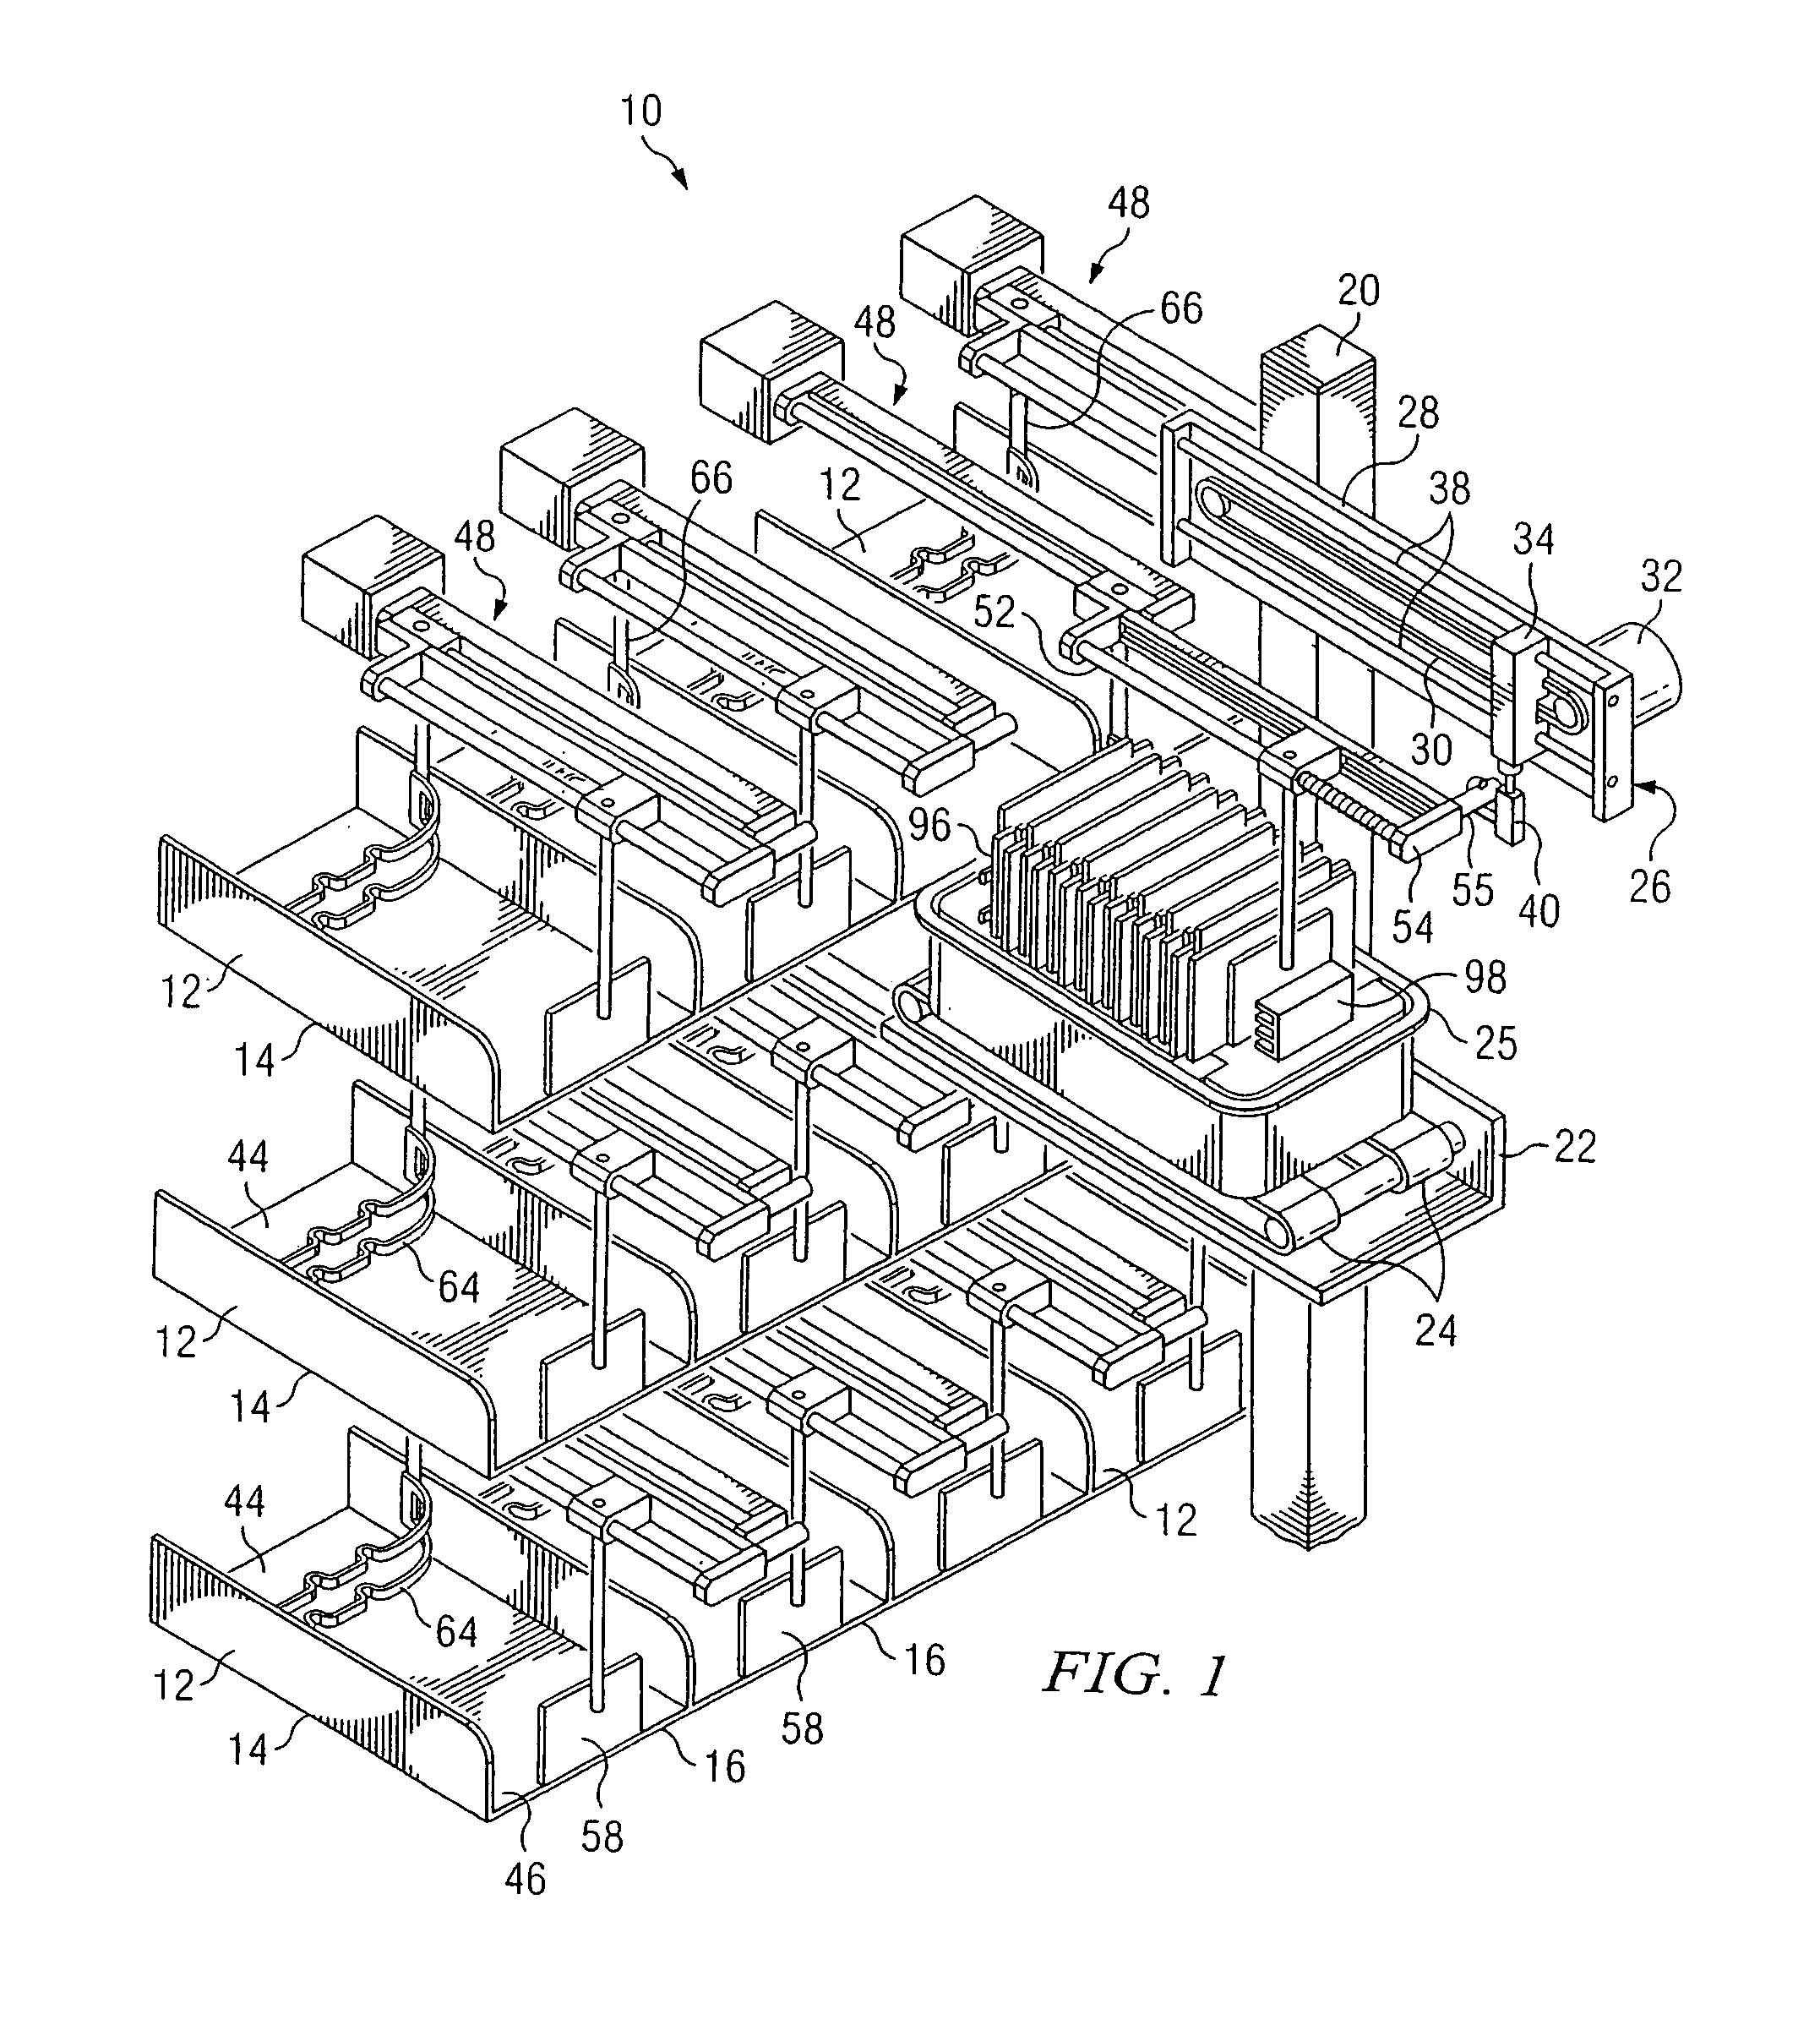 Method and apparatus for mechanized pocket sweeping